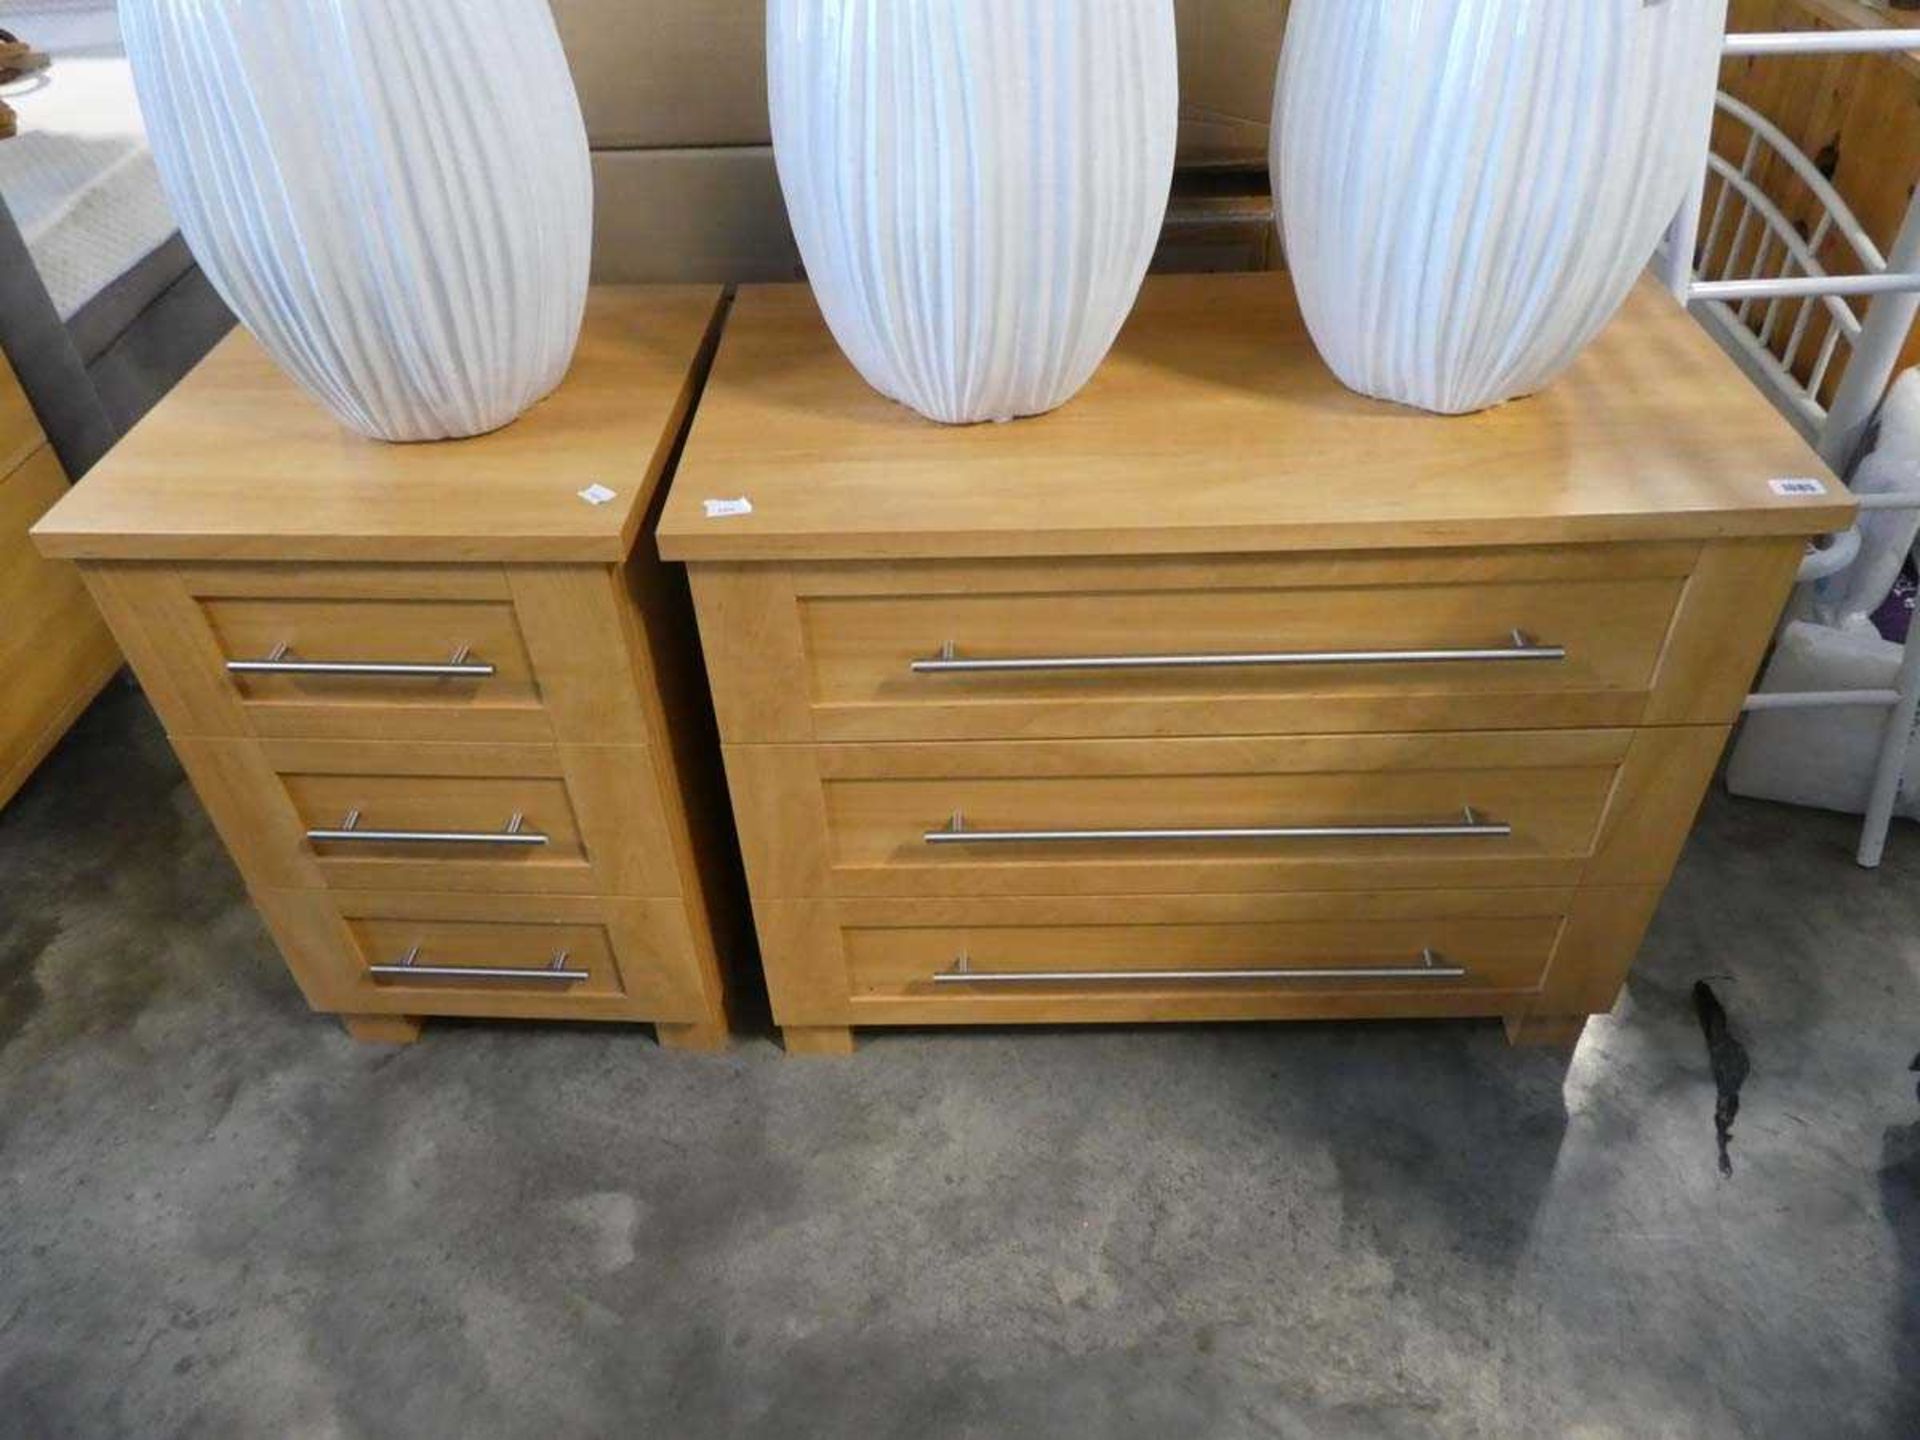 Modern maple effect bedroom suite comprising 3 drawer chest with chrome handles and matching 3